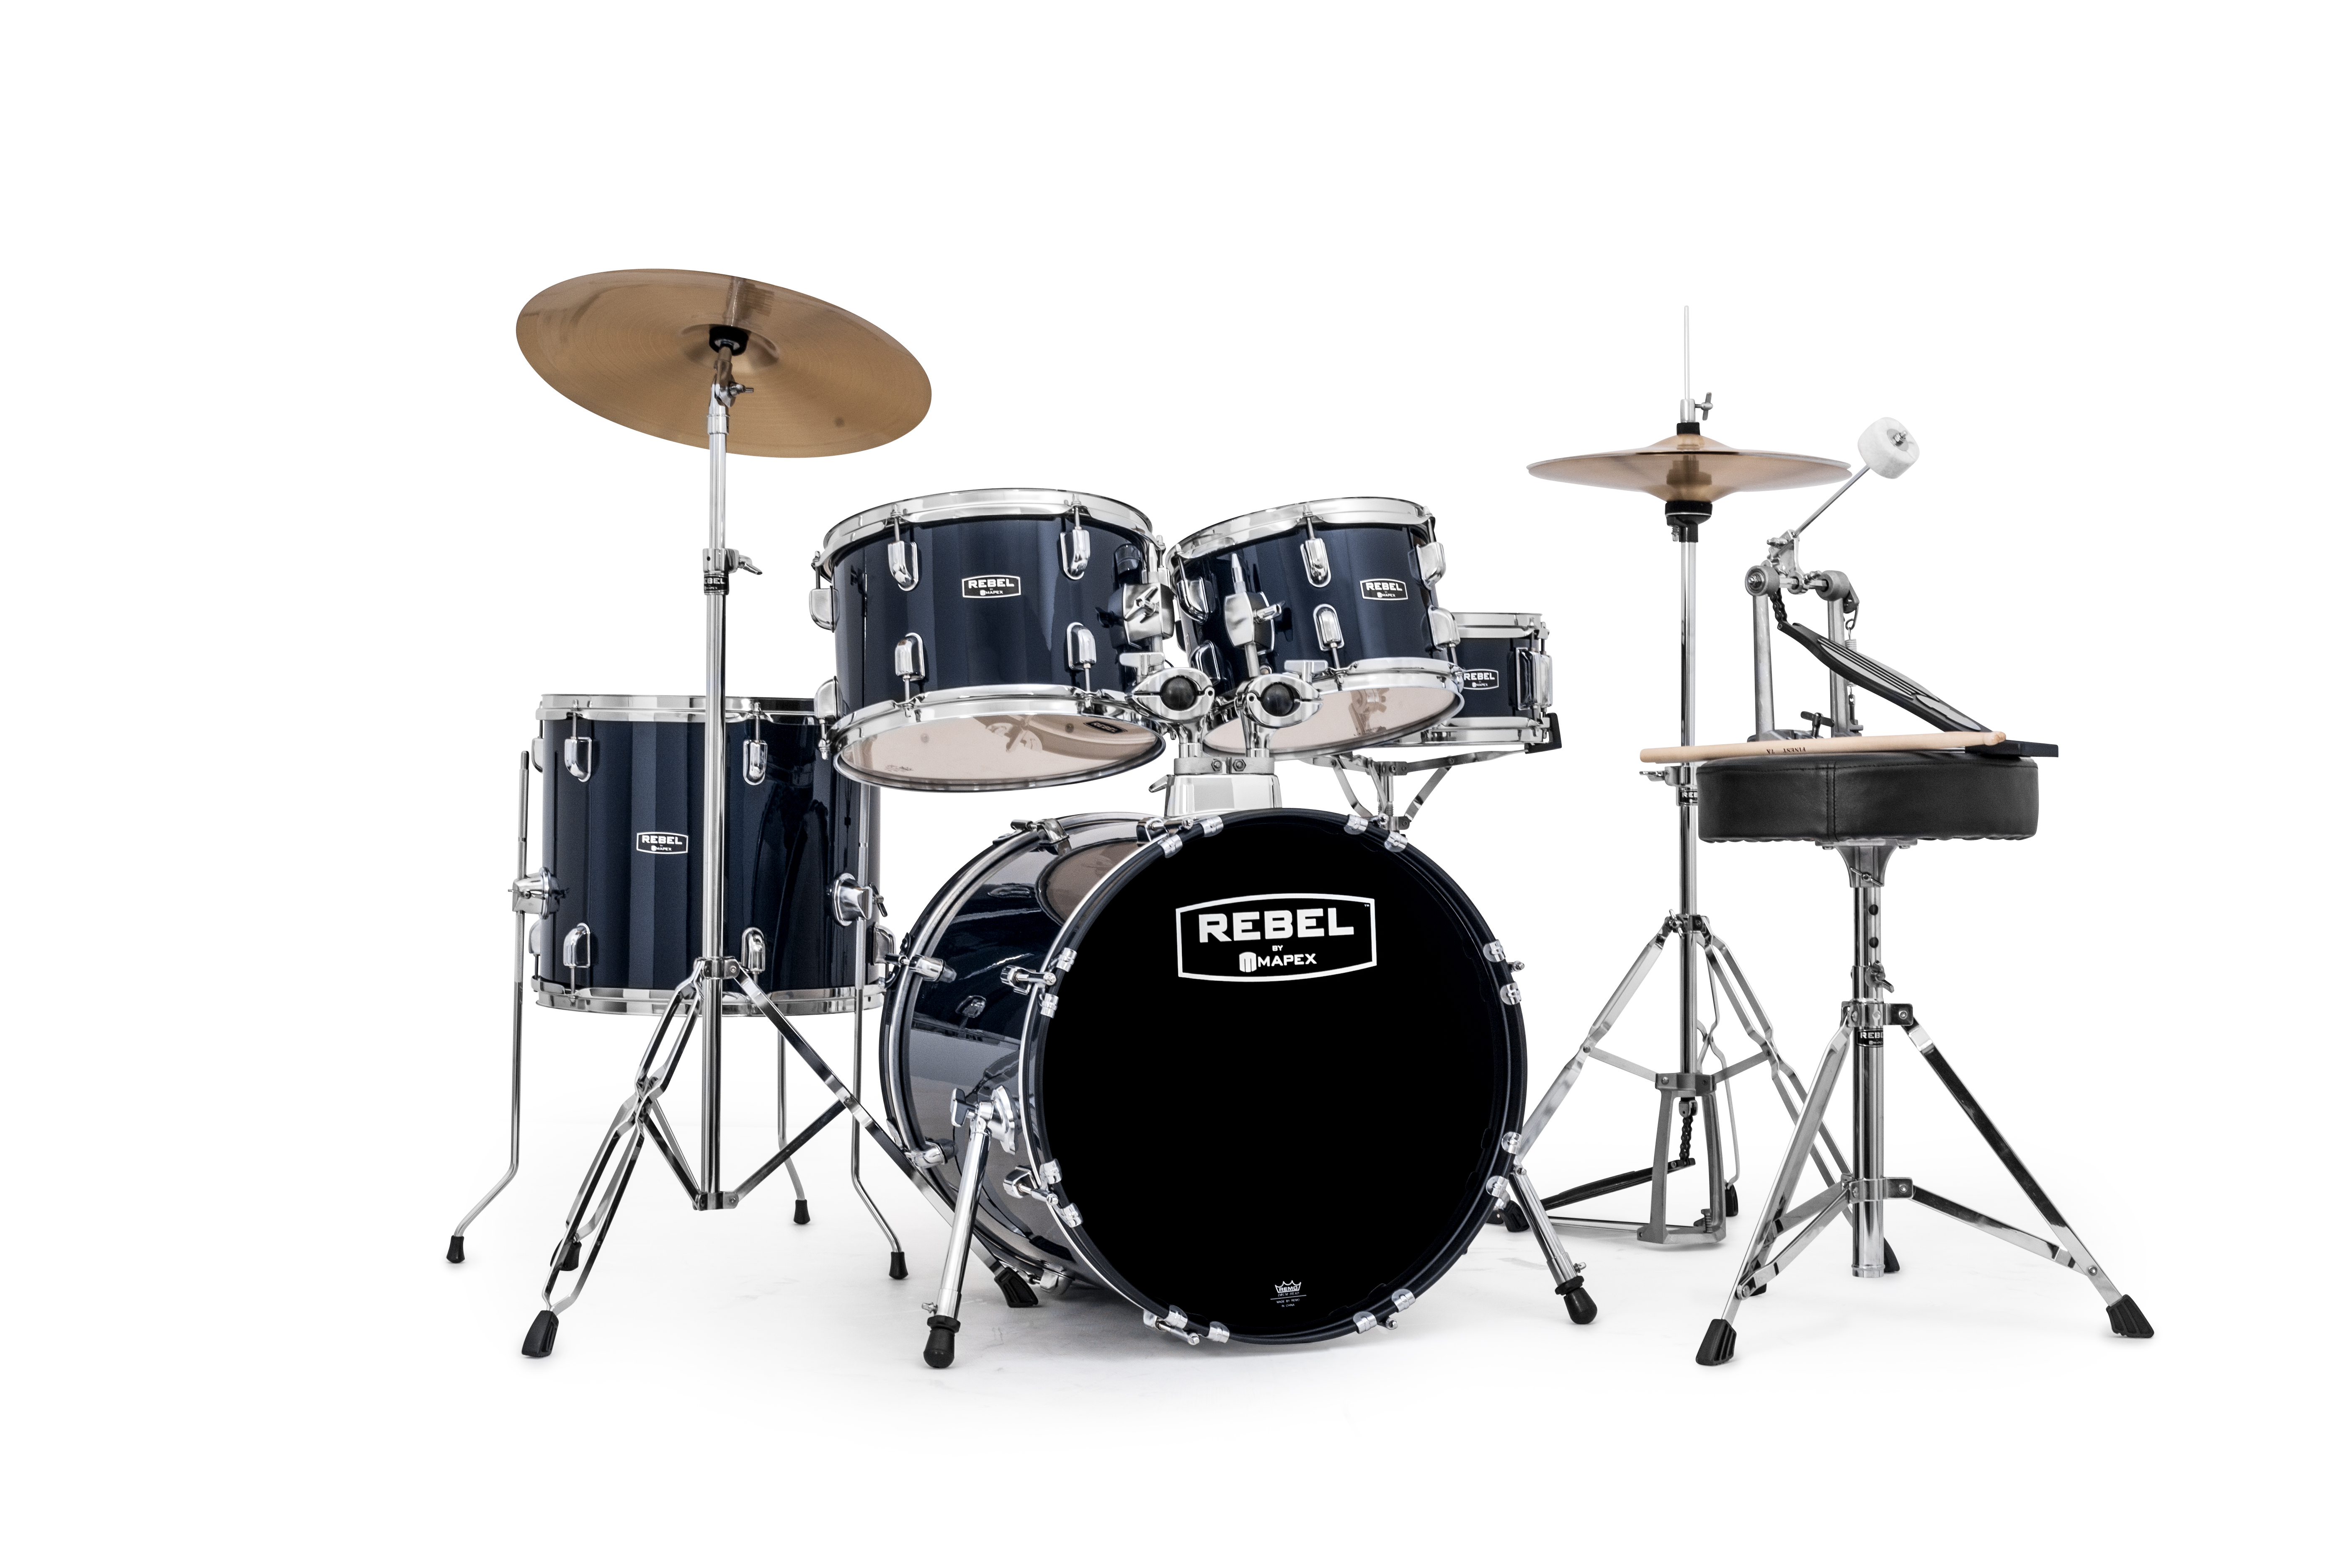 Mapex Rebel 5-piece Complete Junior Set Up with Fast Size Toms - RB5844FTCYB - Royal Blue